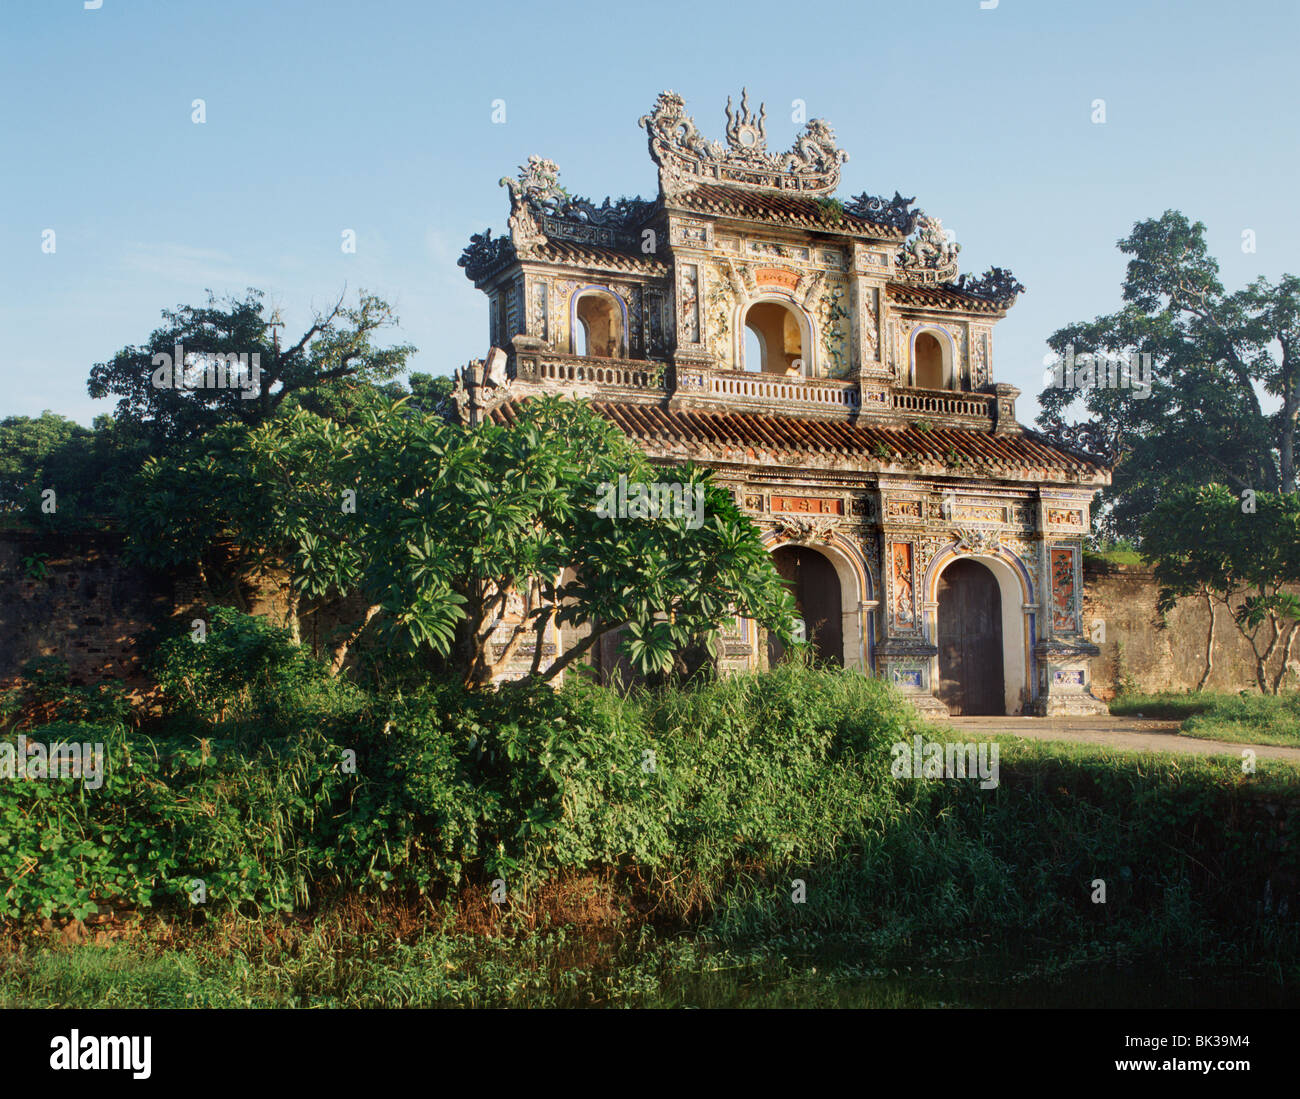 The Gate of Humanity (East Gate), The Citadel at Hue, UNESCO World Heritage Site, Vietnam, Indochina, Southeast Asia, Asia Stock Photo